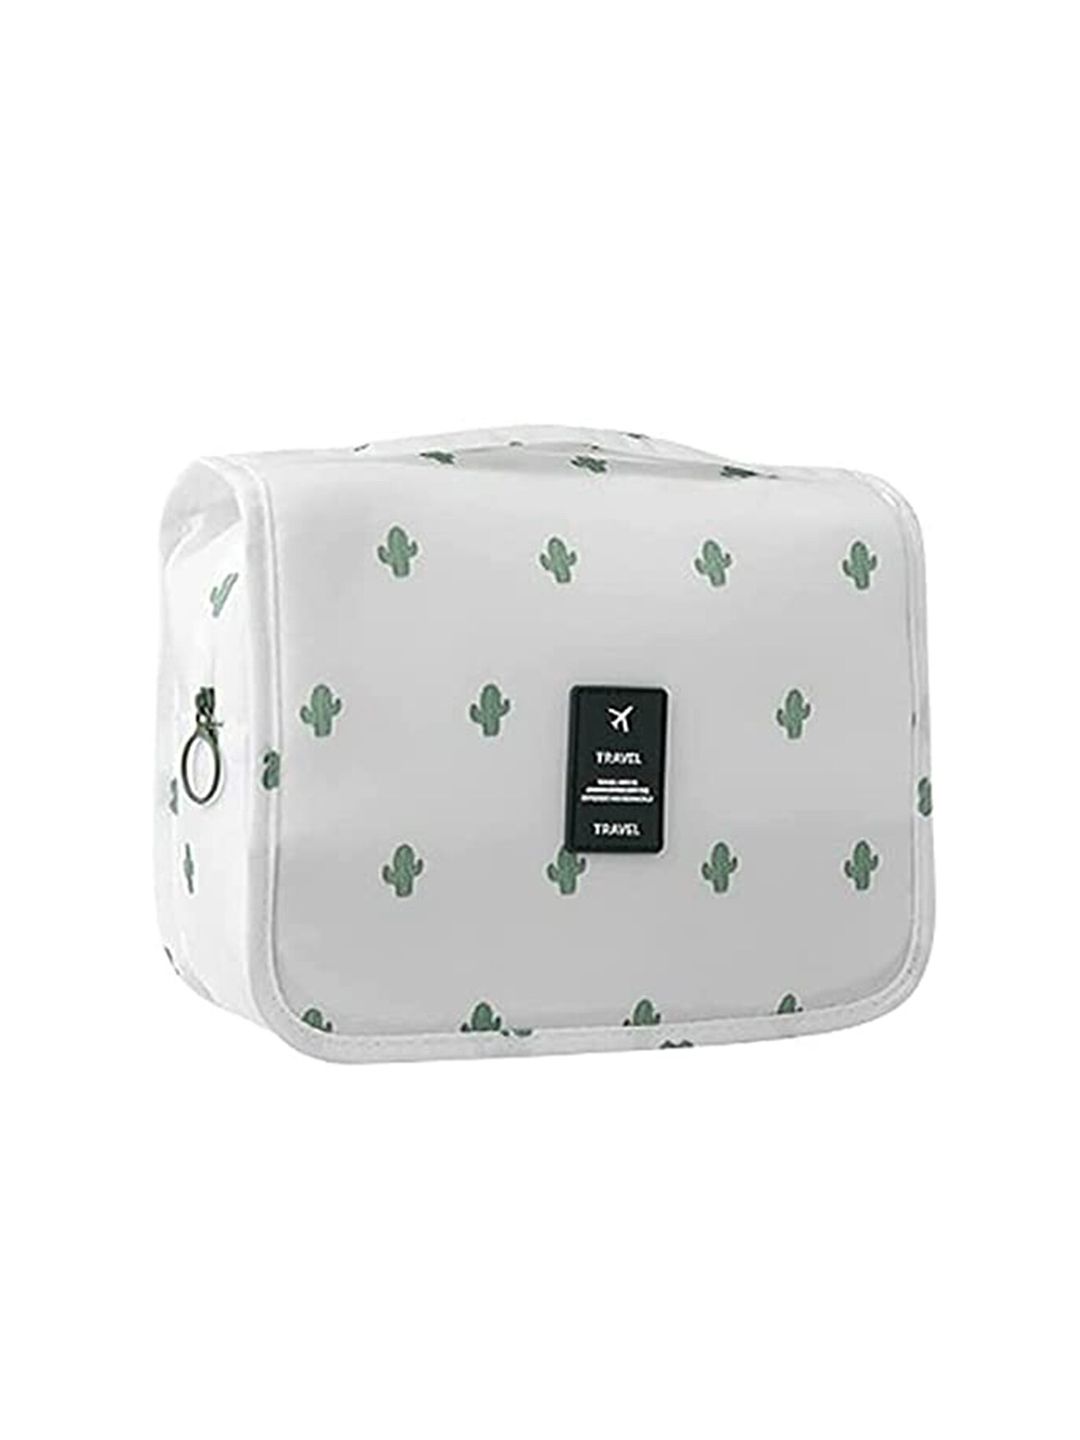 HOUSE OF QUIRK White Cactus Printed Travel Cosmetics Bag Organisers Price in India